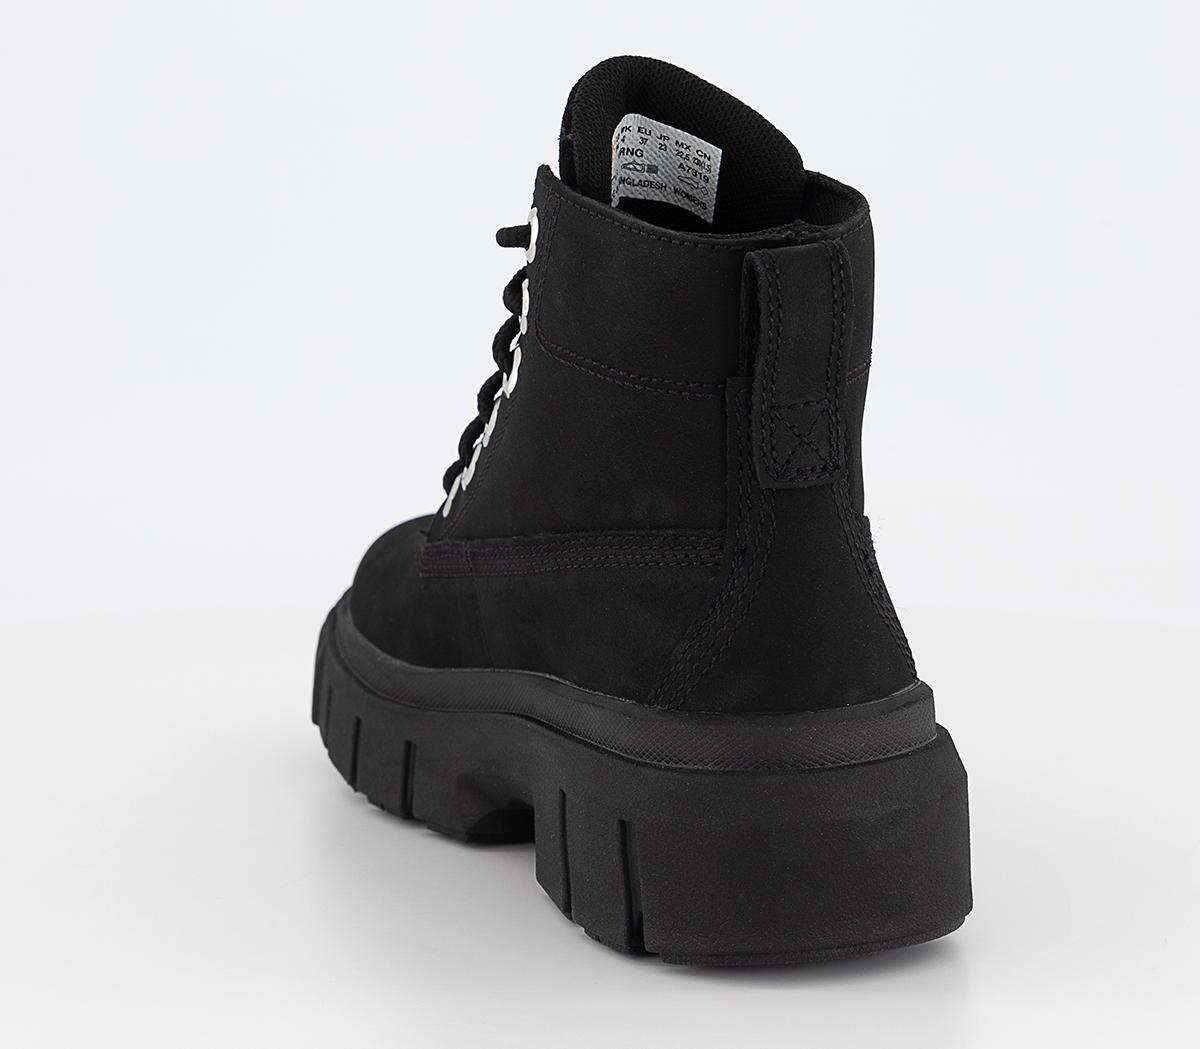 Timberland Greyfield Leather Boots Black - Women's Ankle Boots